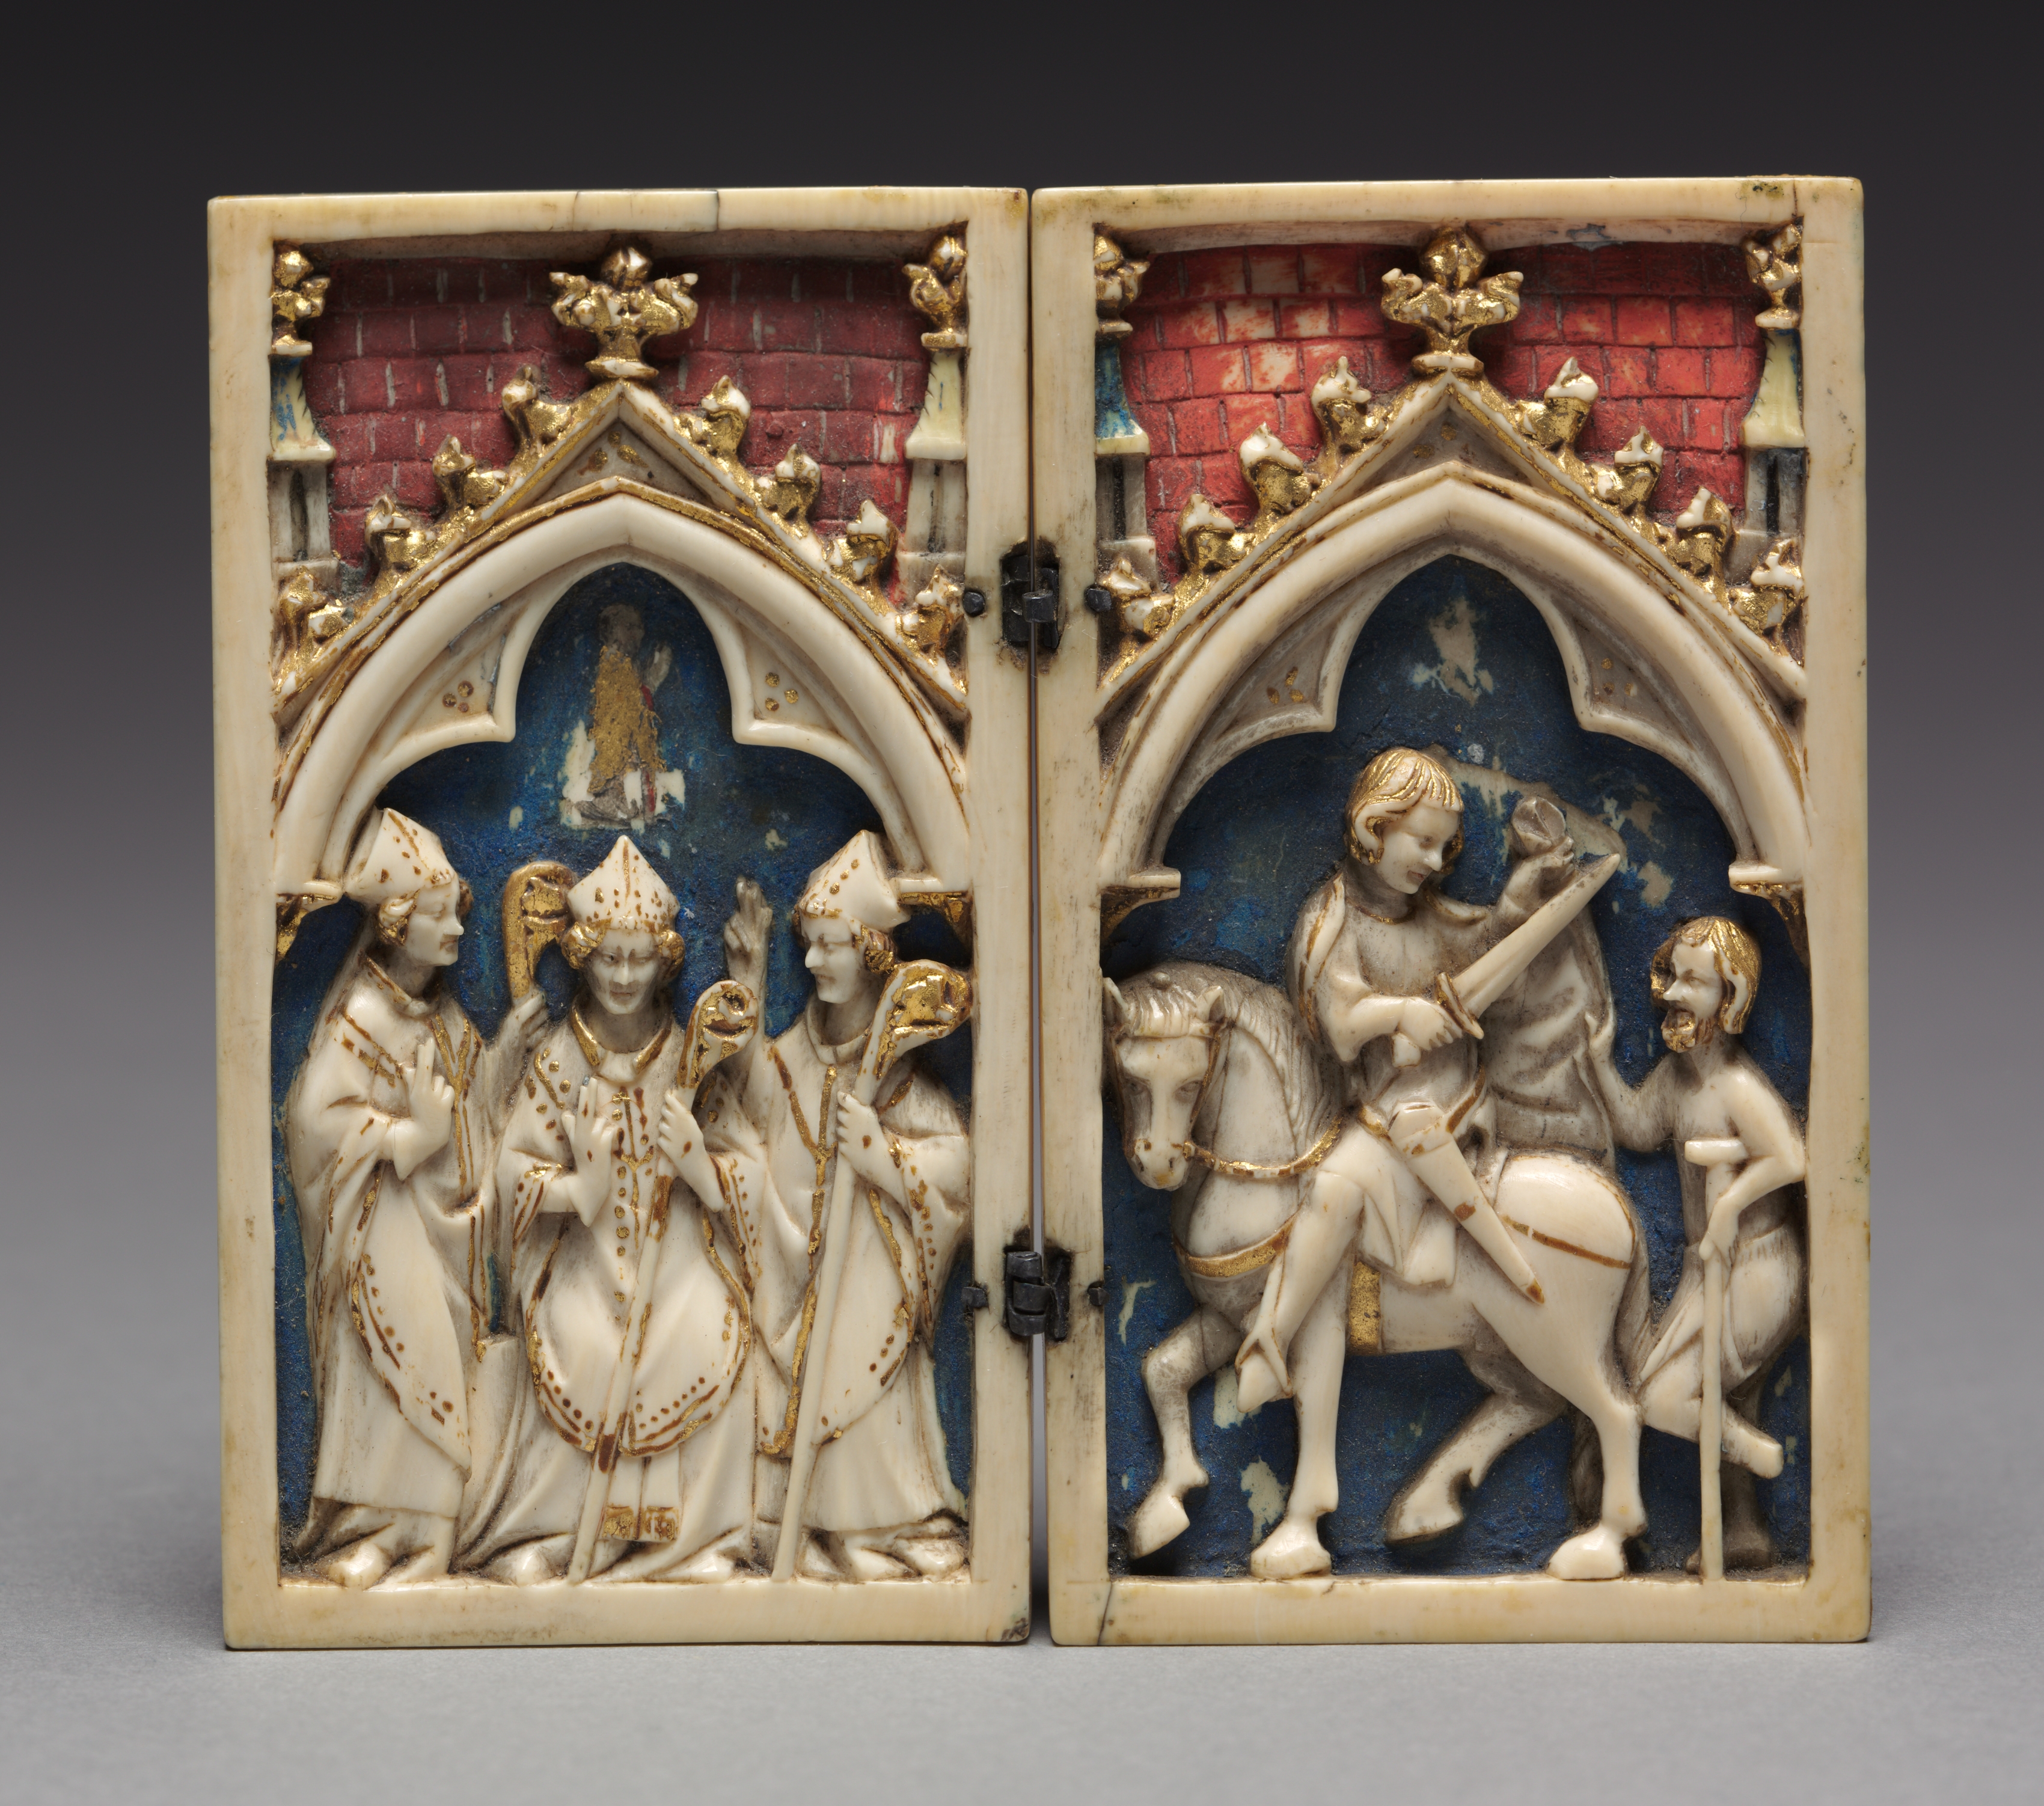 Diptych with Scenes from the Life of Saint Martin of Tours: The Consecration of Saint Martin as Bishop (left); Saint Martin Shares his Cloak with a Beggar